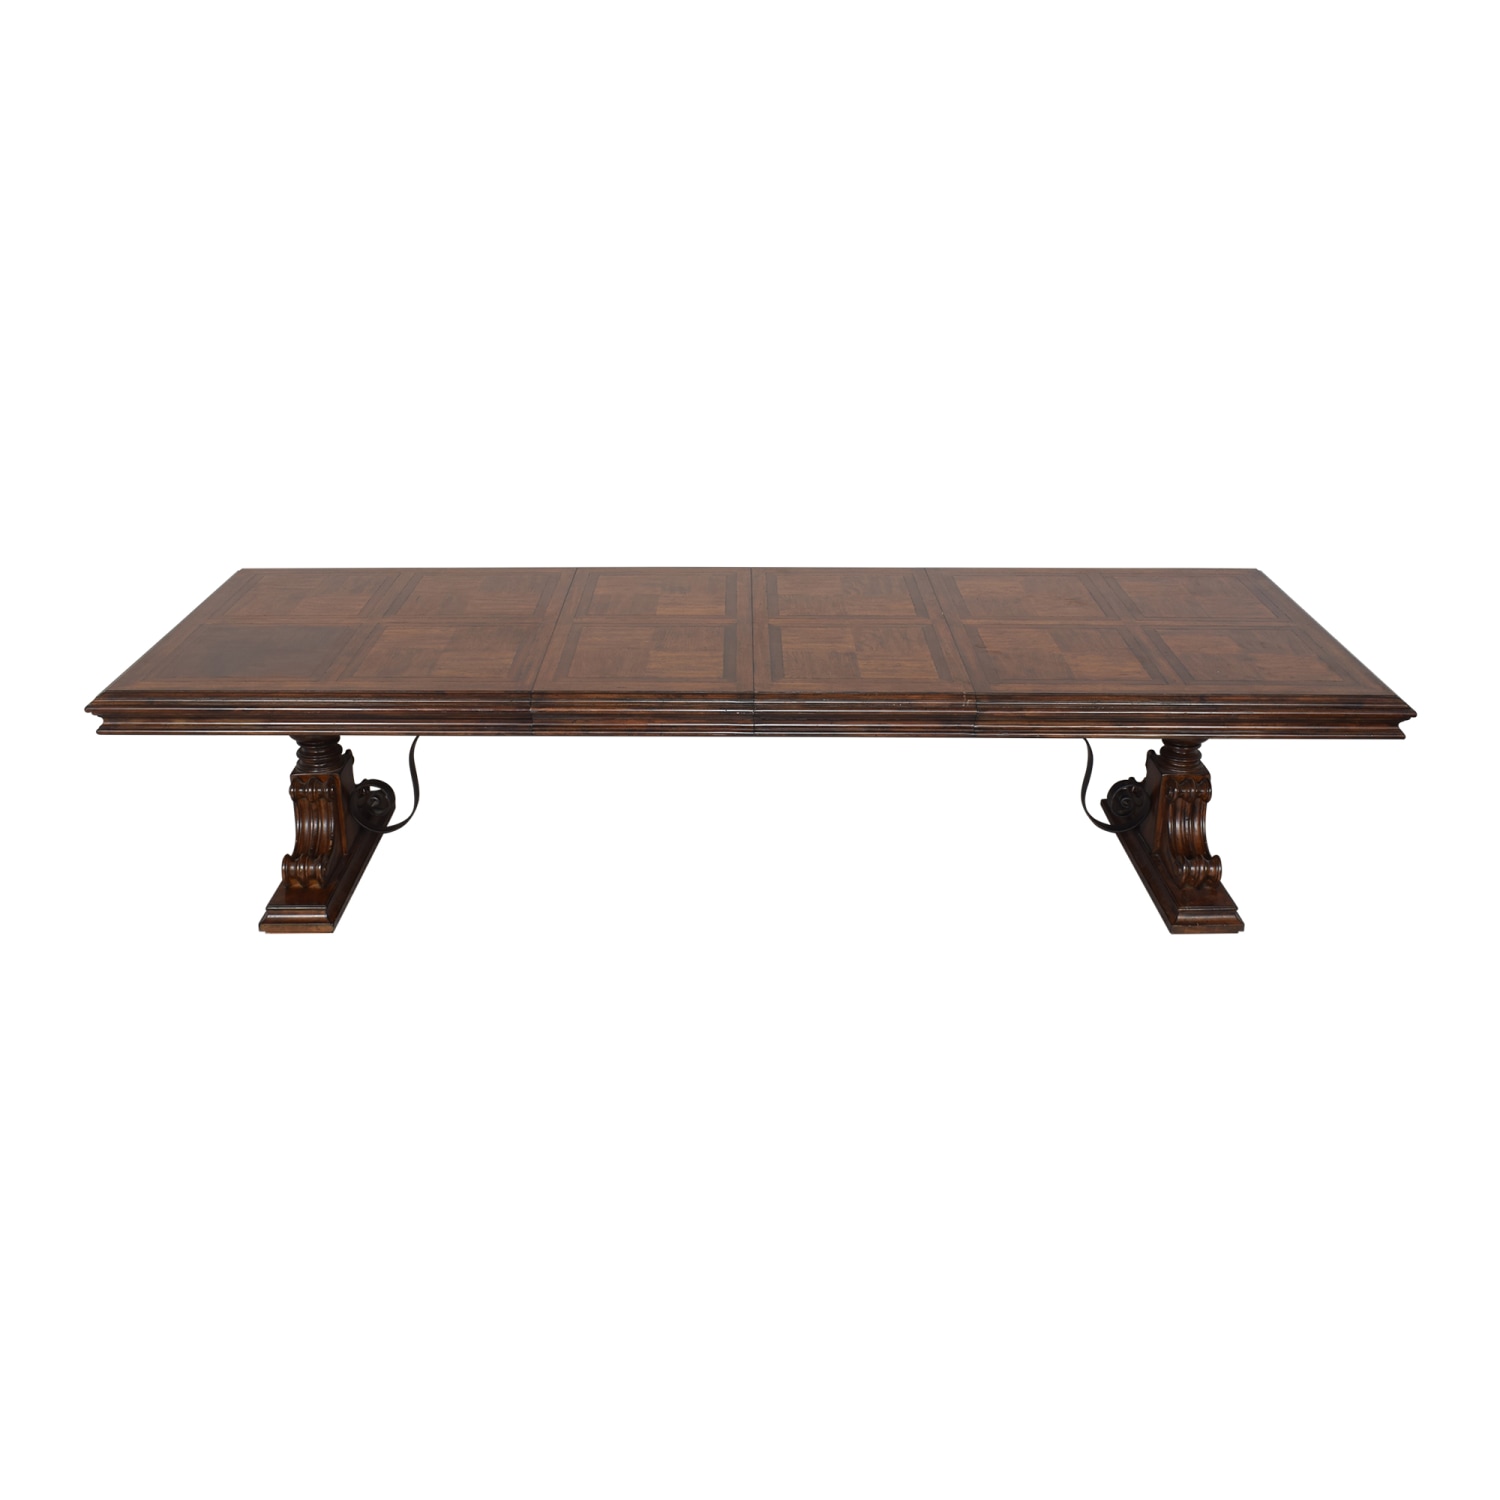 https://res.cloudinary.com/dkqtxtobb/image/upload/f_auto,q_auto:best,w_1500/product-assets/170962/stanley-furniture/tables/dinner-tables/used-stanley-furniture-costa-del-sol-dining-table.jpeg